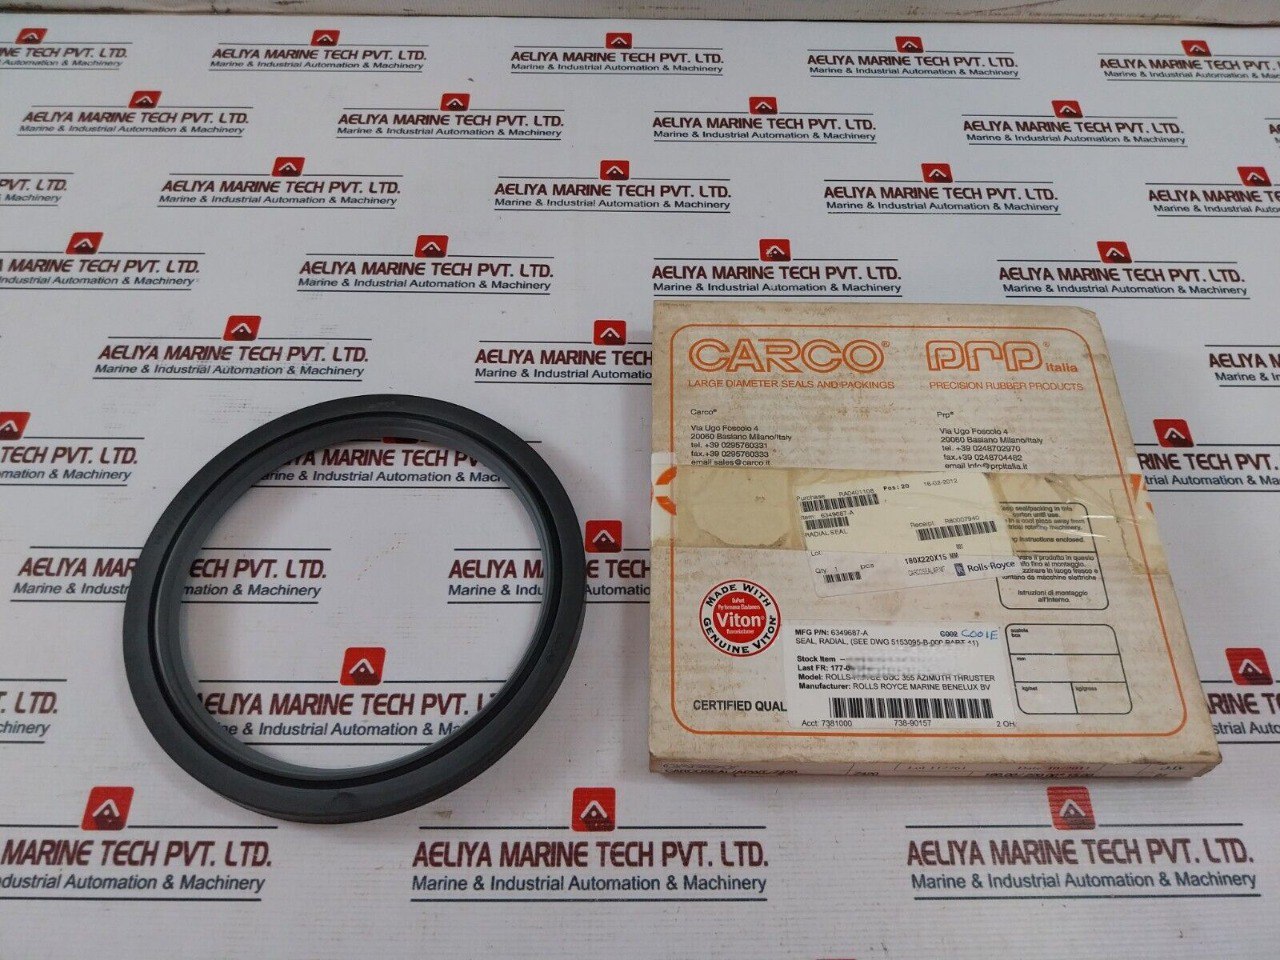 Carco Seal/Apwt/Z420 Radial Seal 6349687-a